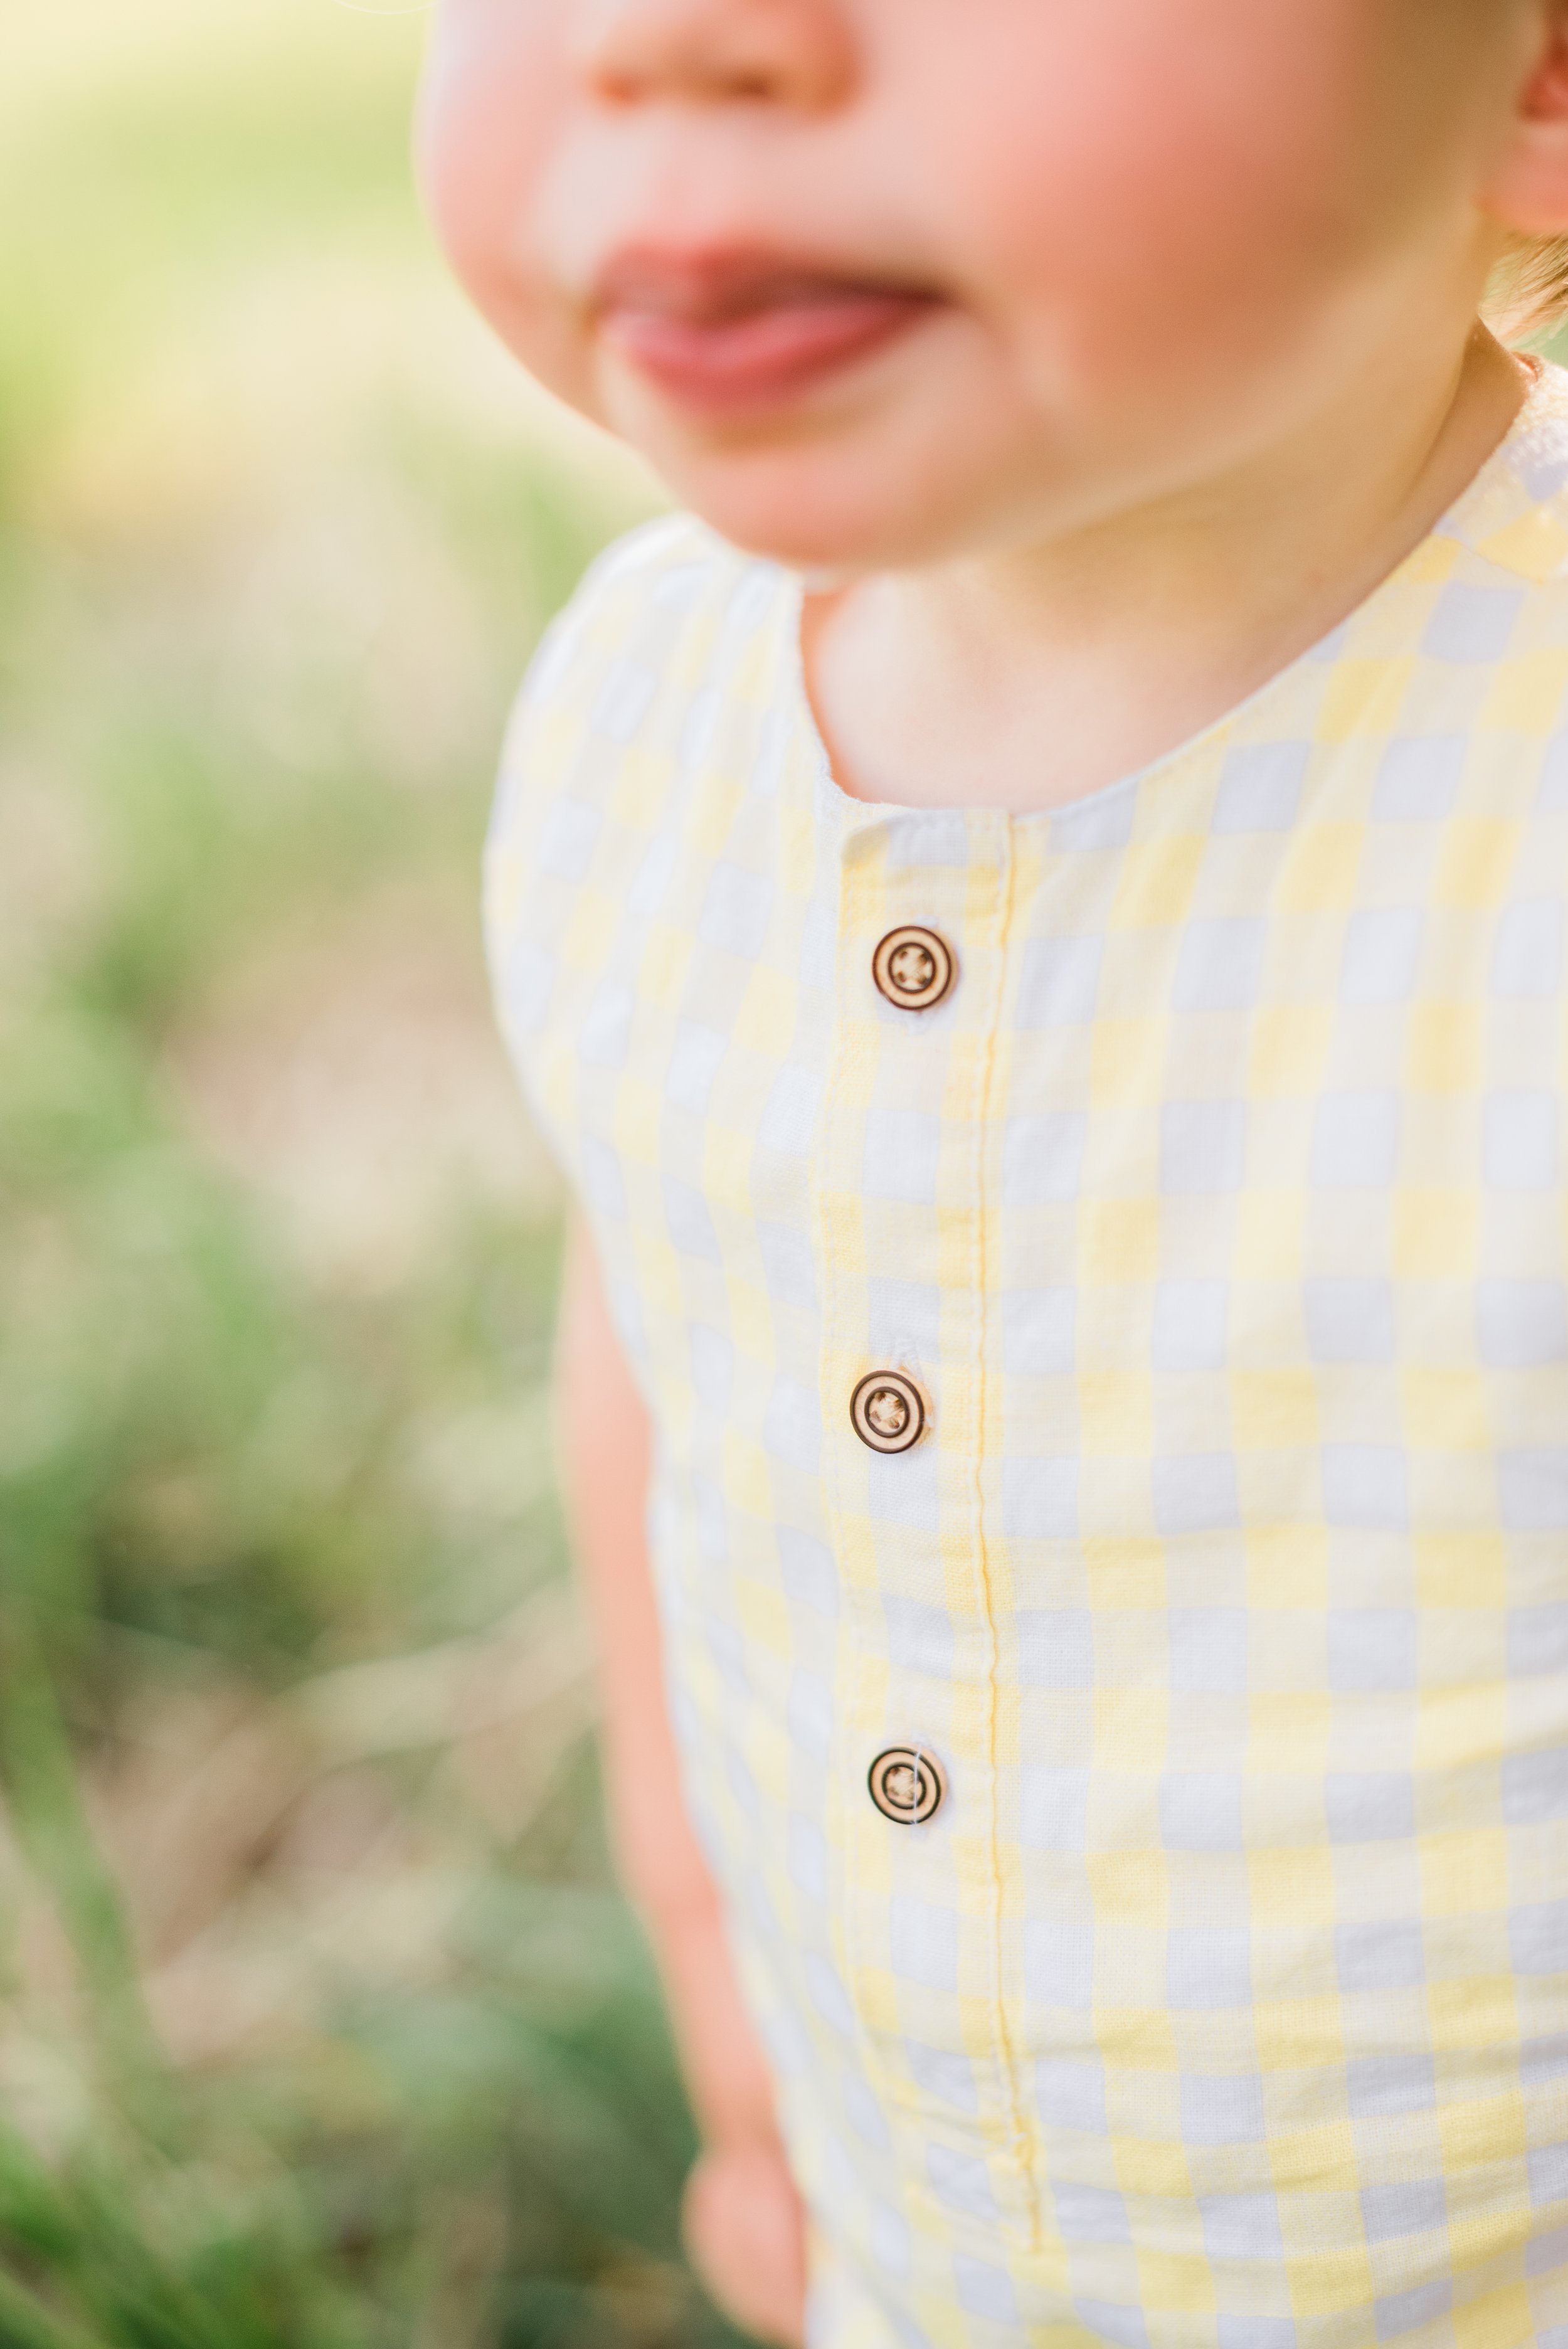  This close-up photo captures the details of a toddler with their puckered lips and rosy cheeks. Closeup toddler photo rosy cheers toddler girl #closeupshot #chubbytoddler #toddlerface #jacquieerickson #youngkids #georgiaphotographer 